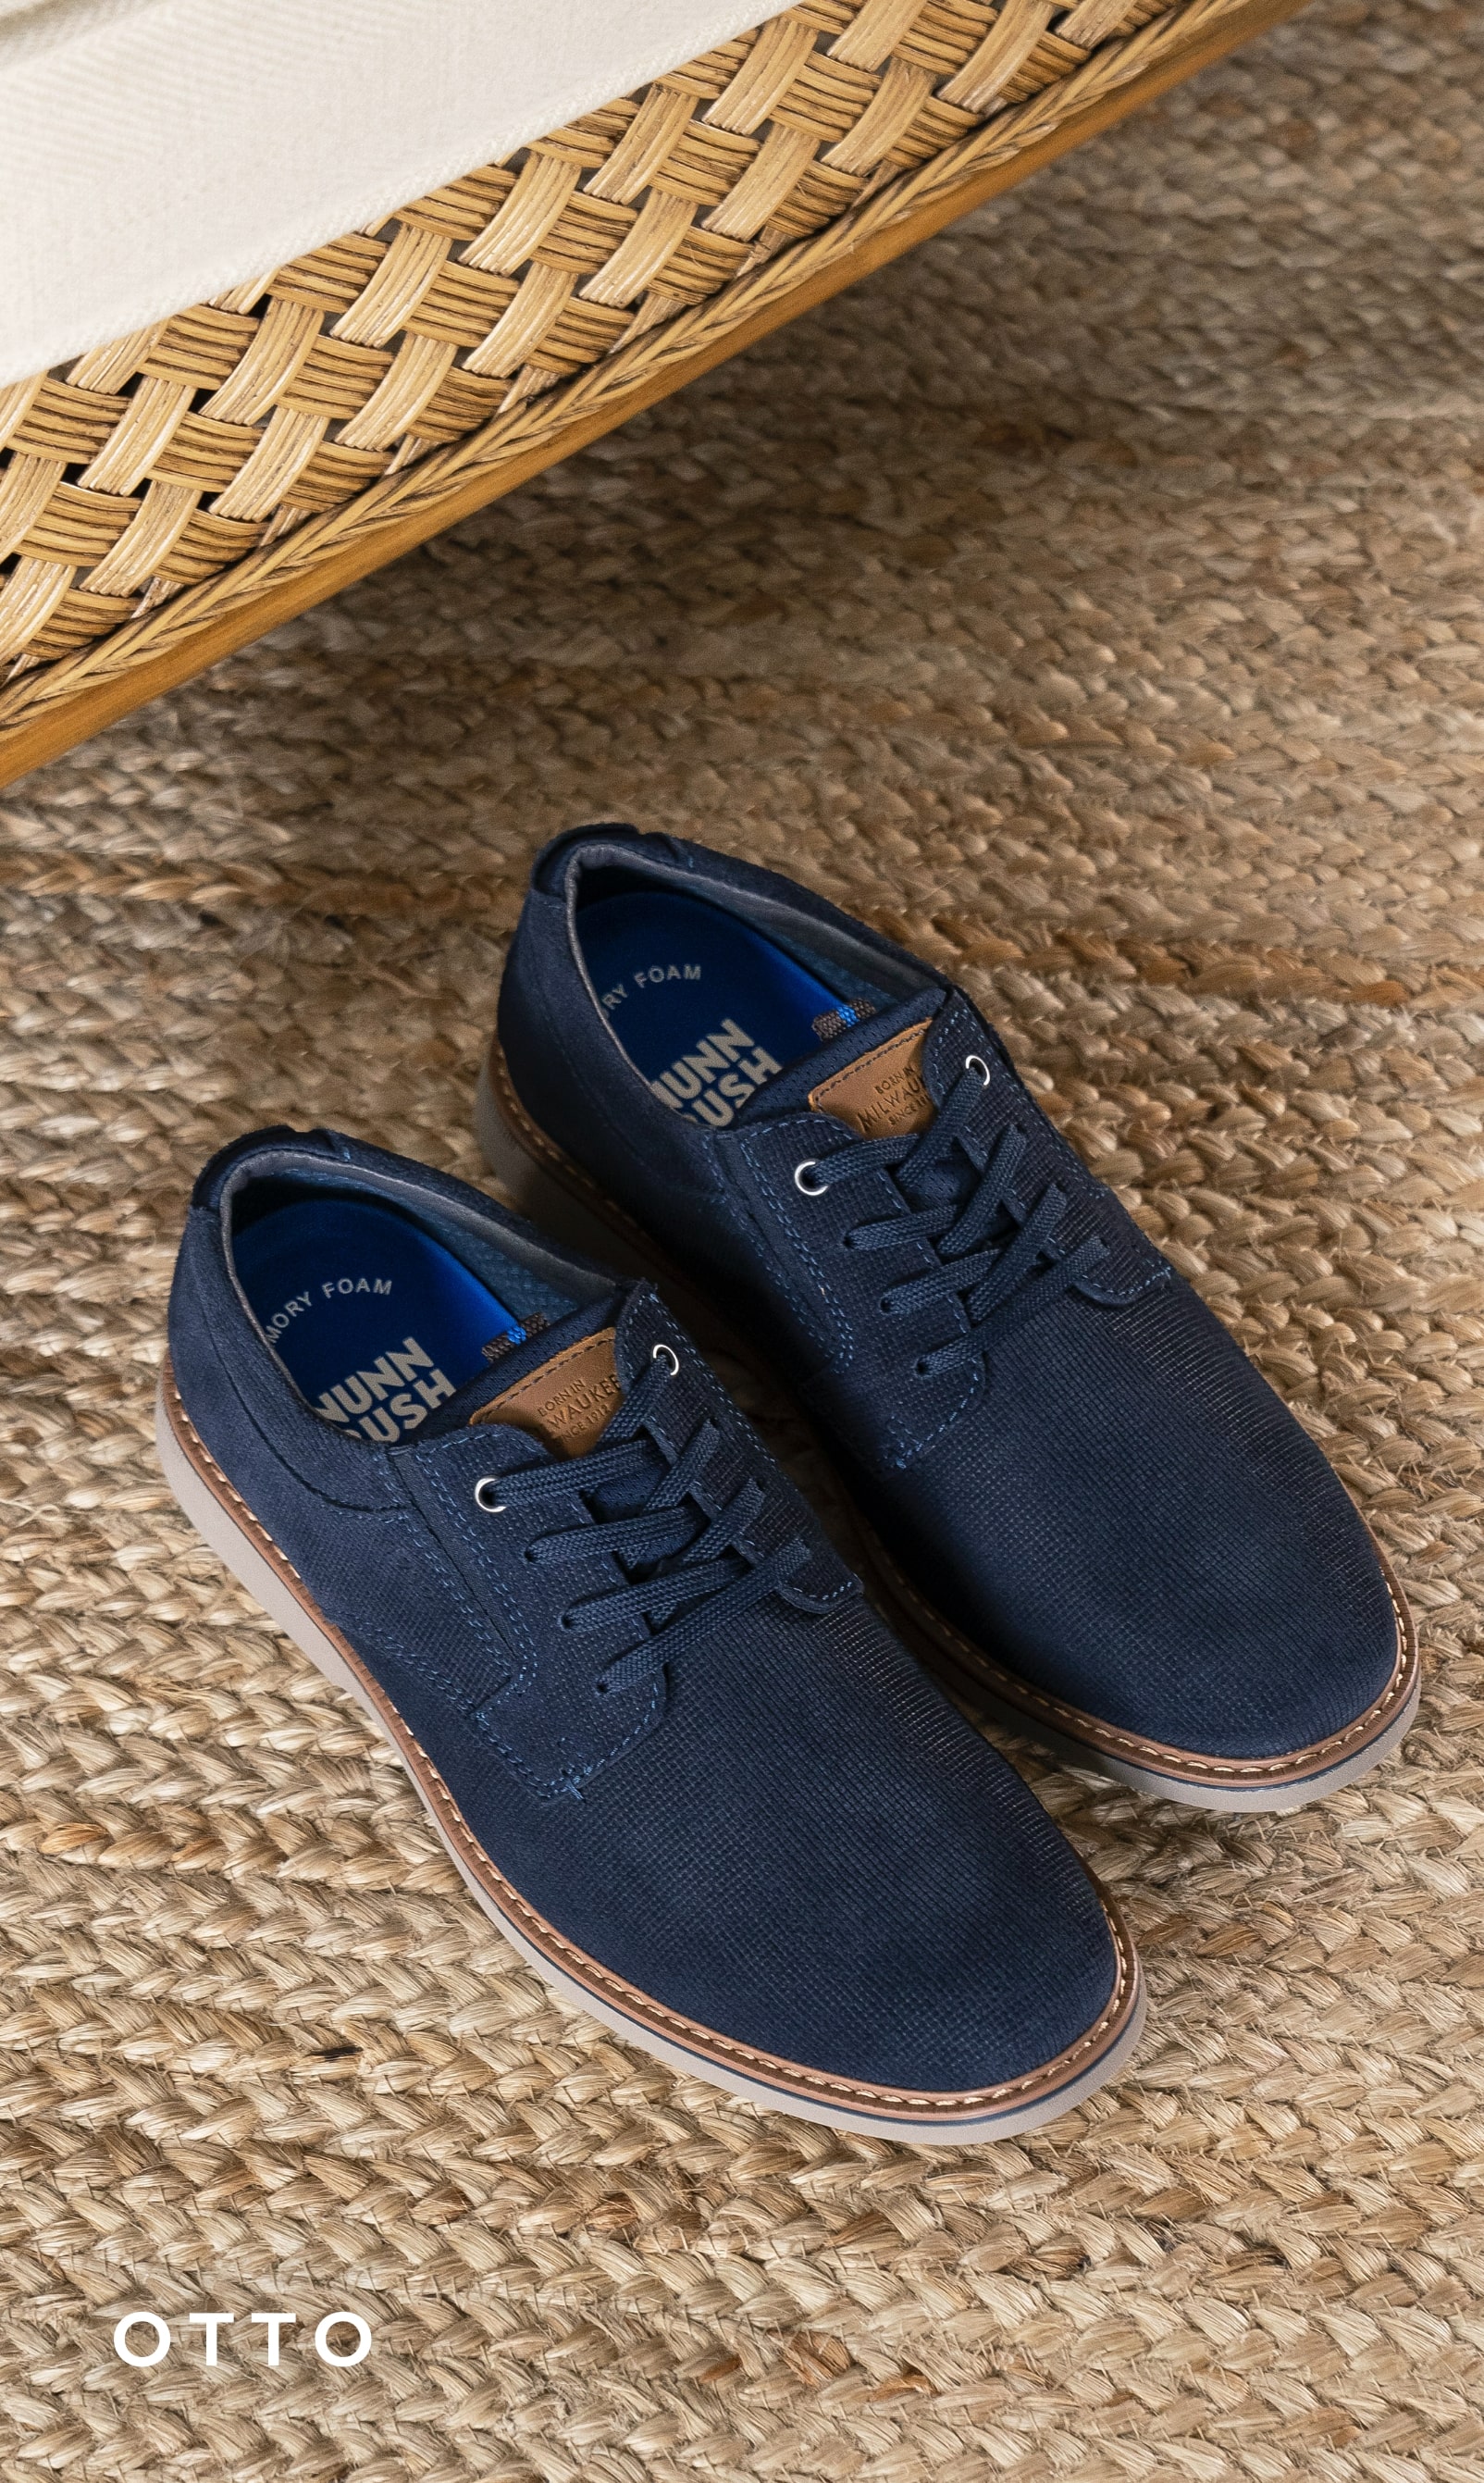 Men's Casual Shoes category. Image features the Otto Oxford in navy.